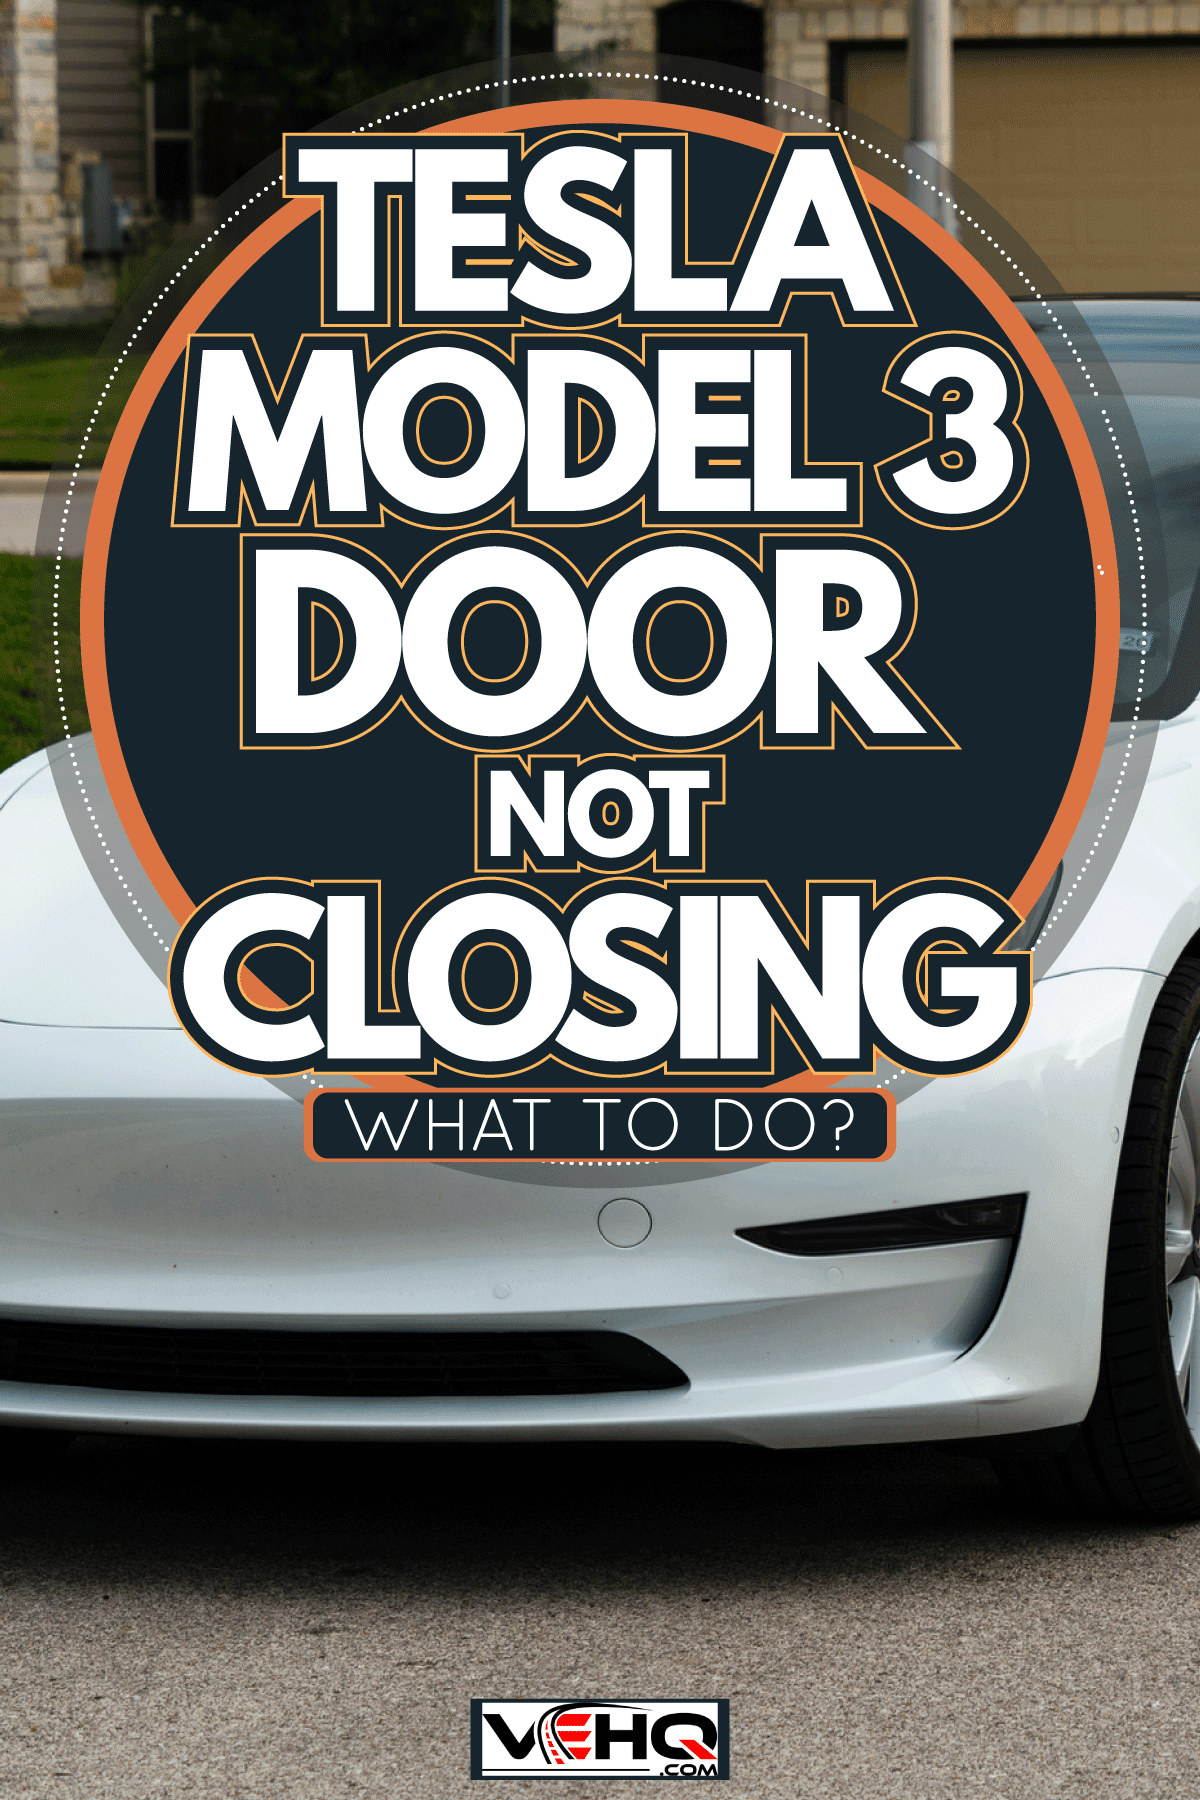 White Tesla Model 3 The American Made Electric sports car, Tesla Model 3 Door Not Closing - What To Do?